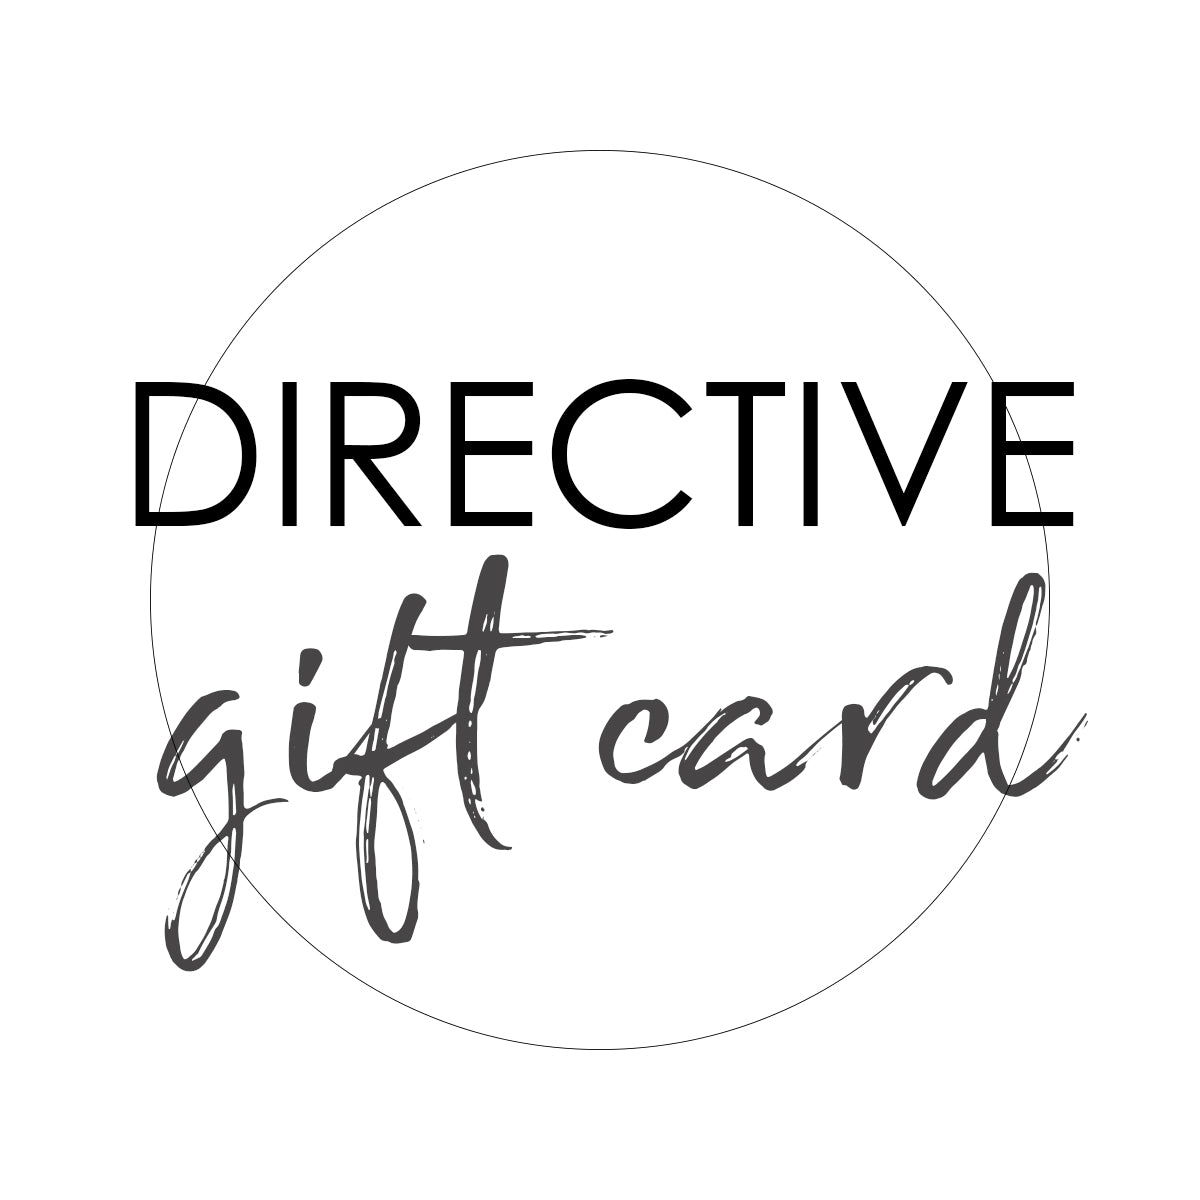 Directive Gift Card